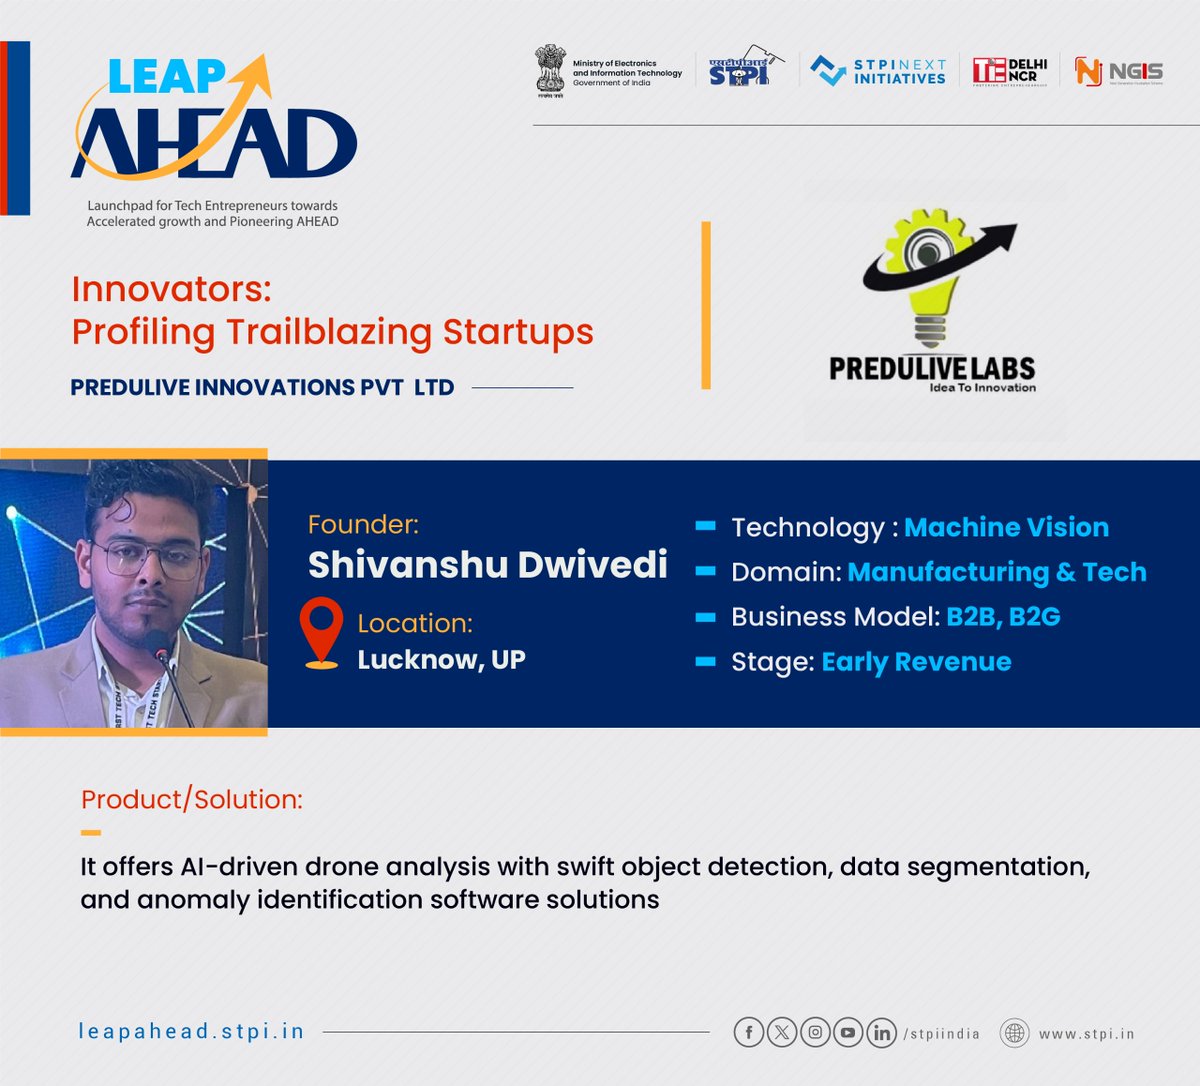 @predulive Innovative Pvt Ltd, one of the 75+ selected startups for LEAP AHEAD Cohort, is transforming agriculture and infrastructure with cutting-edge drone solutions leveraged with advanced computer vision and AI algorithms.